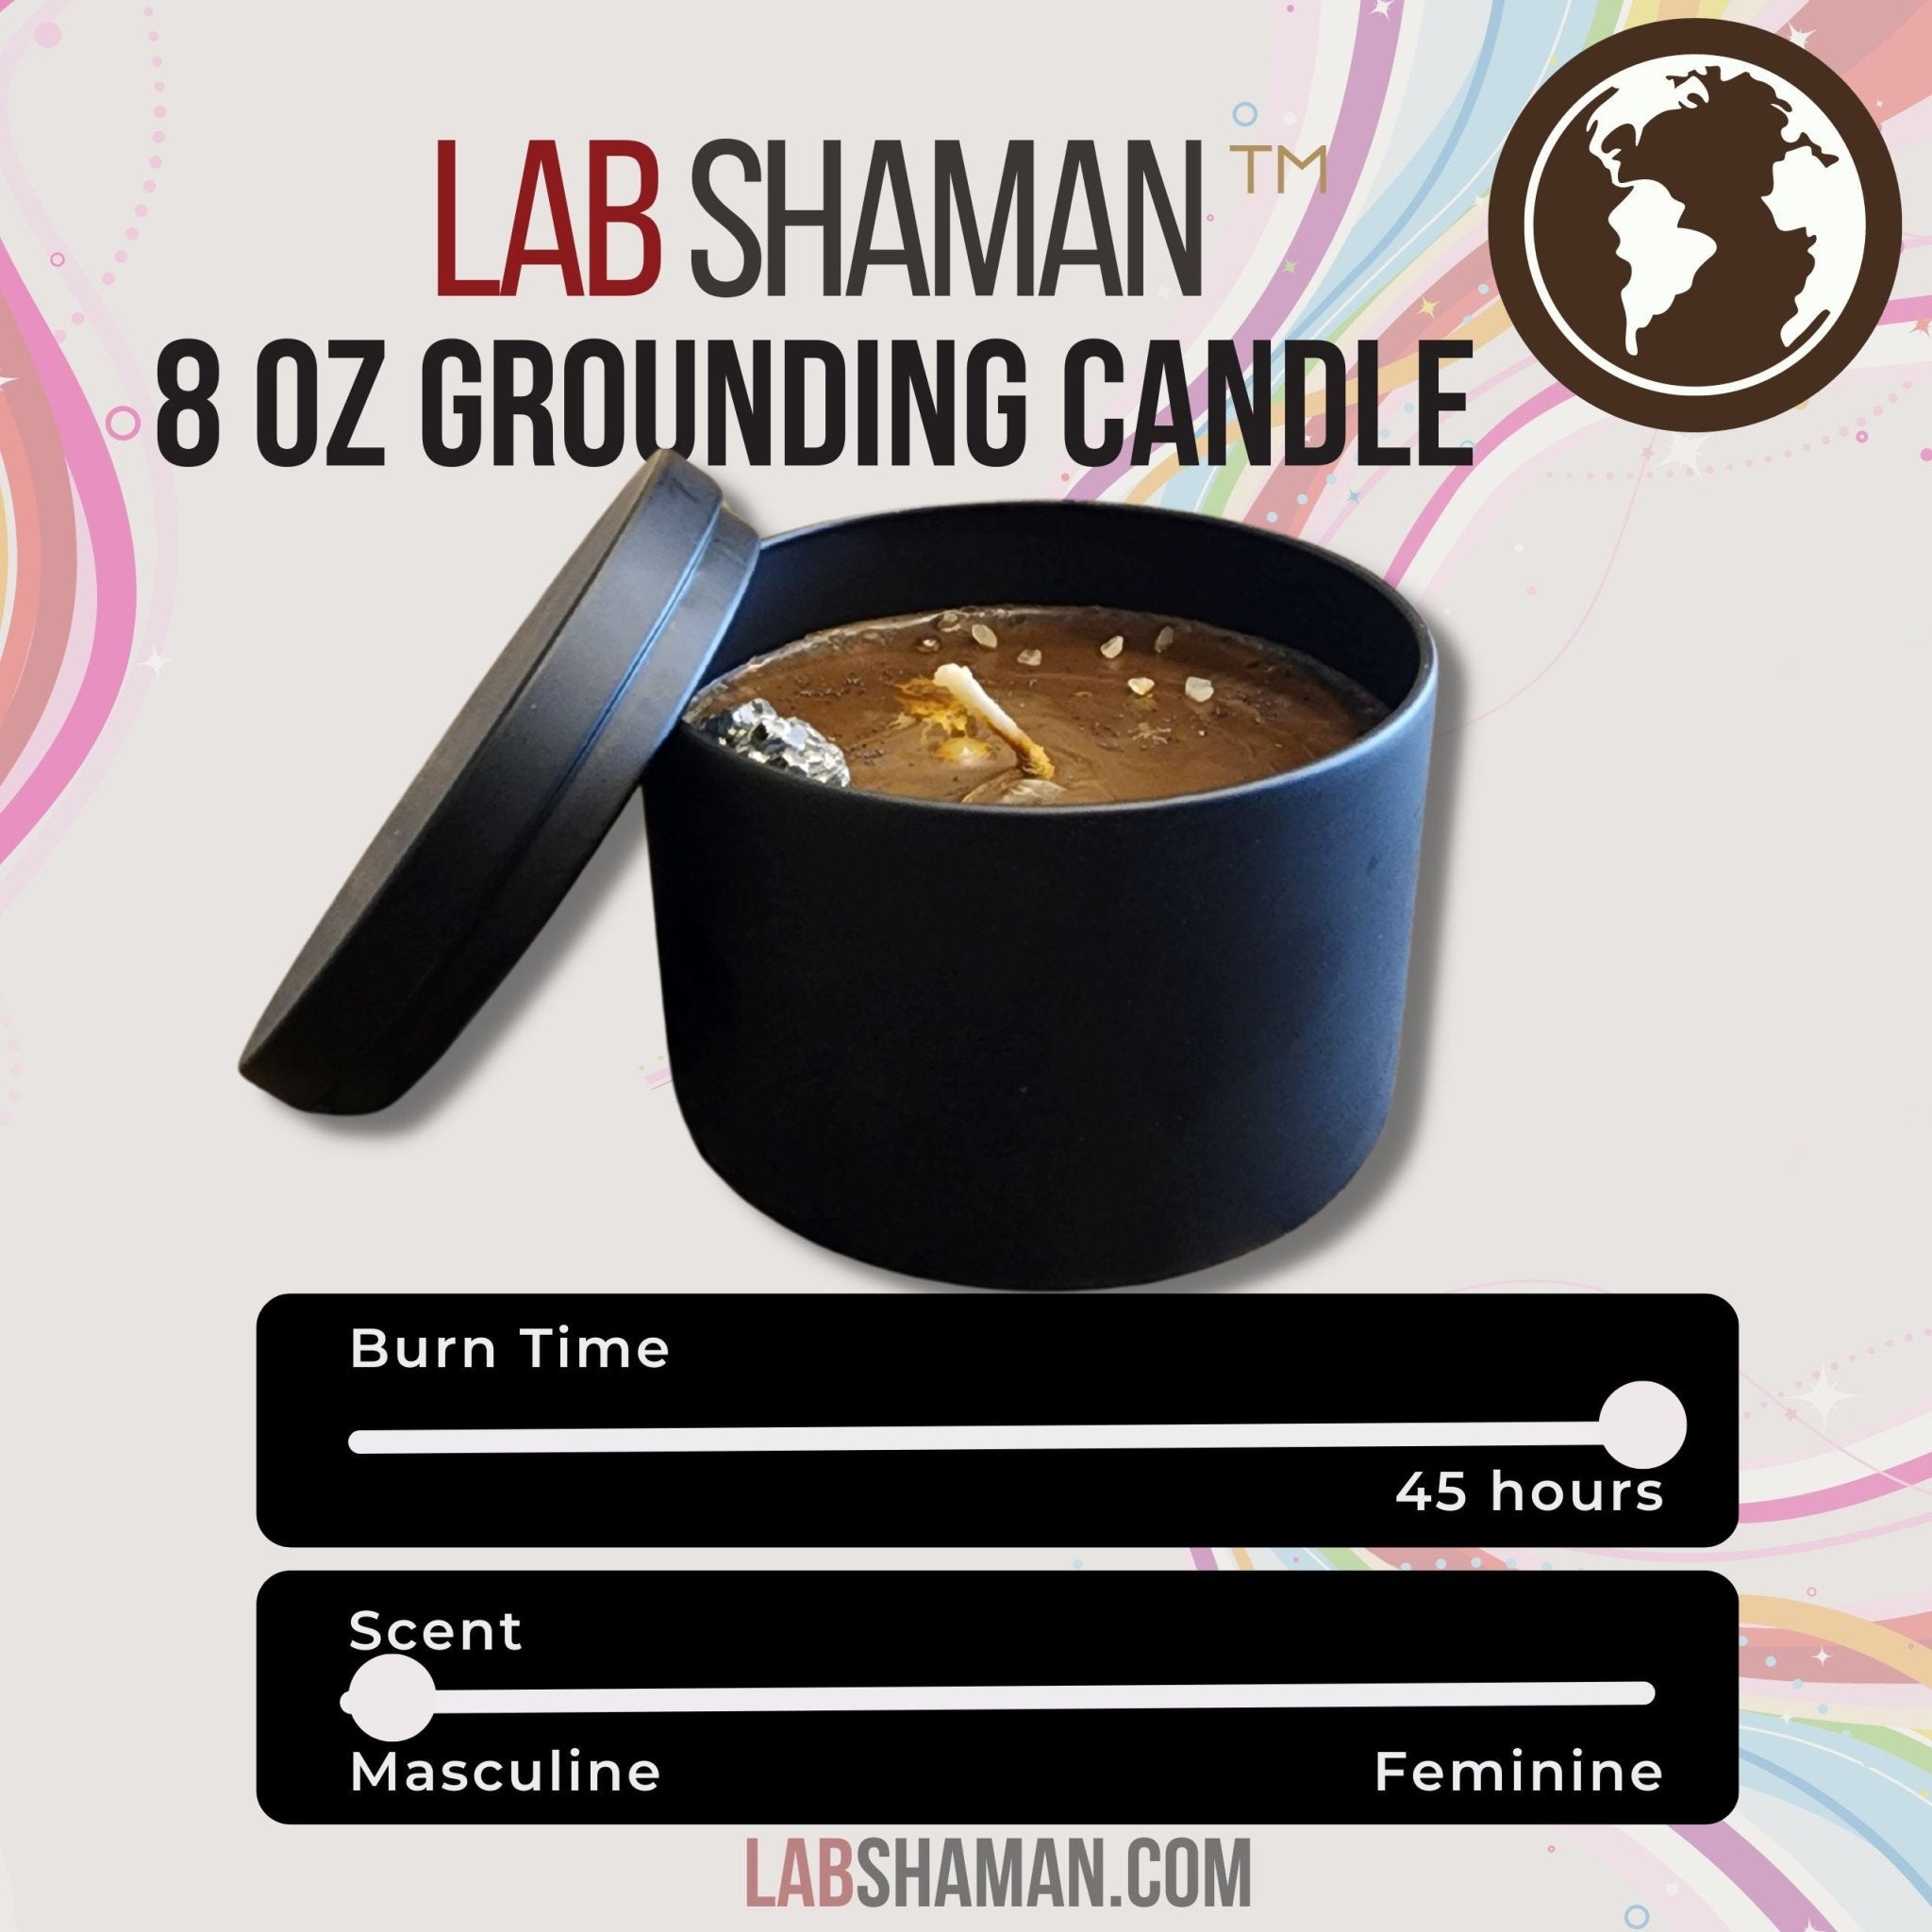  Grounding Candle - For Meditation, Masculine Energy & Centering  | LAB Shaman by LABShaman sold by LABShaman